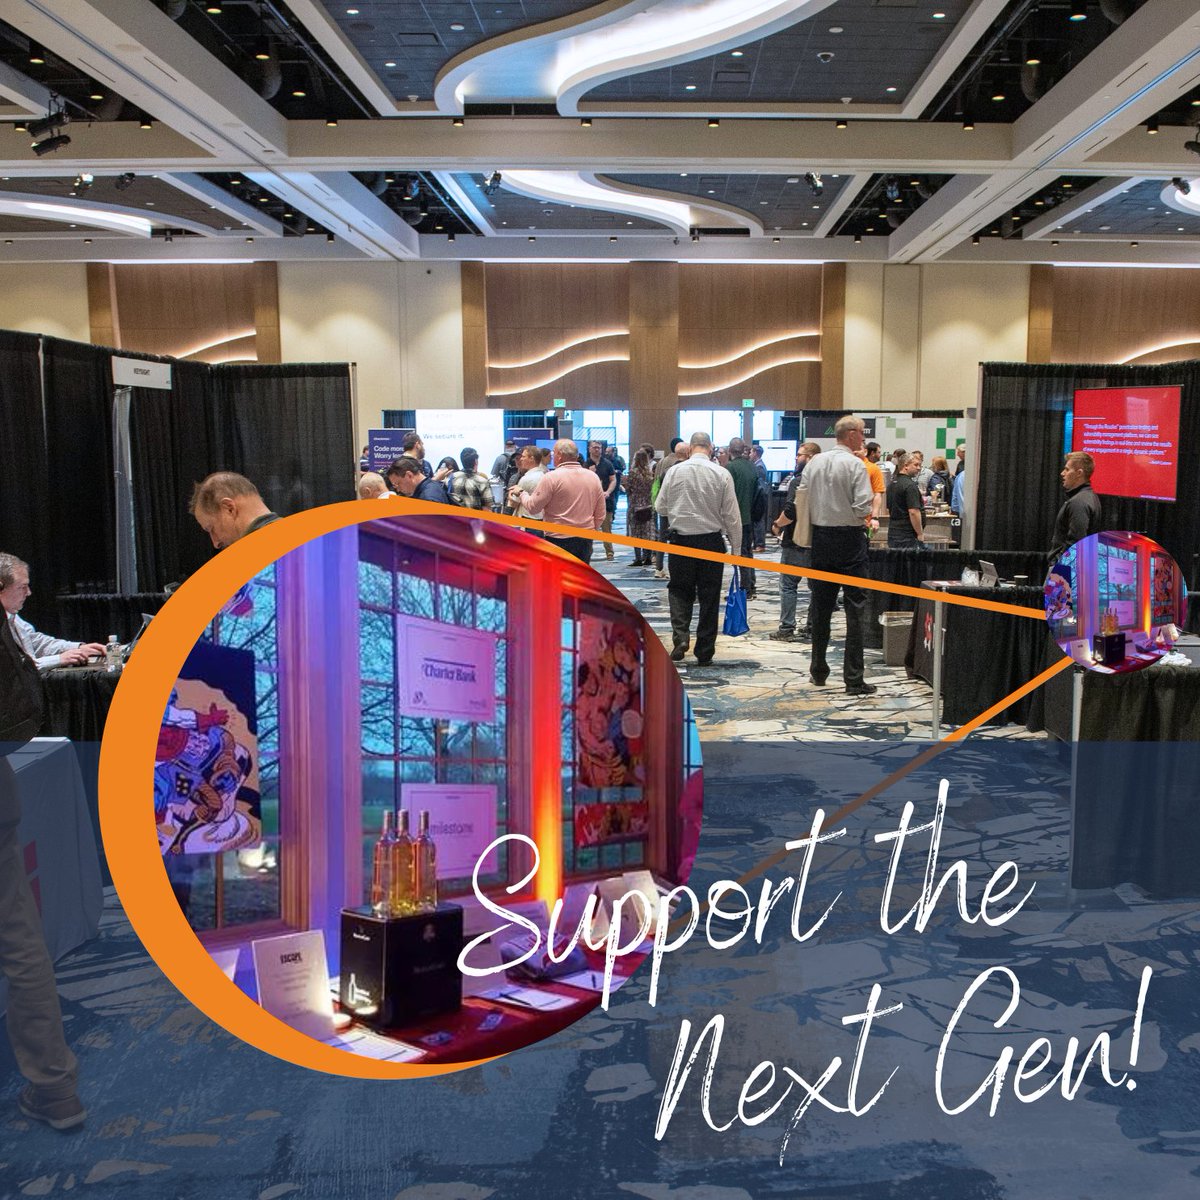 *New this Year!* 

Support the next generation while scoring on some sweet items offered by our exhibitors! Bid on themed baskets, sought-after technology, and... well, we can't say just yet! 

Stay tuned for the auction to open the week of the conference. #Sec360